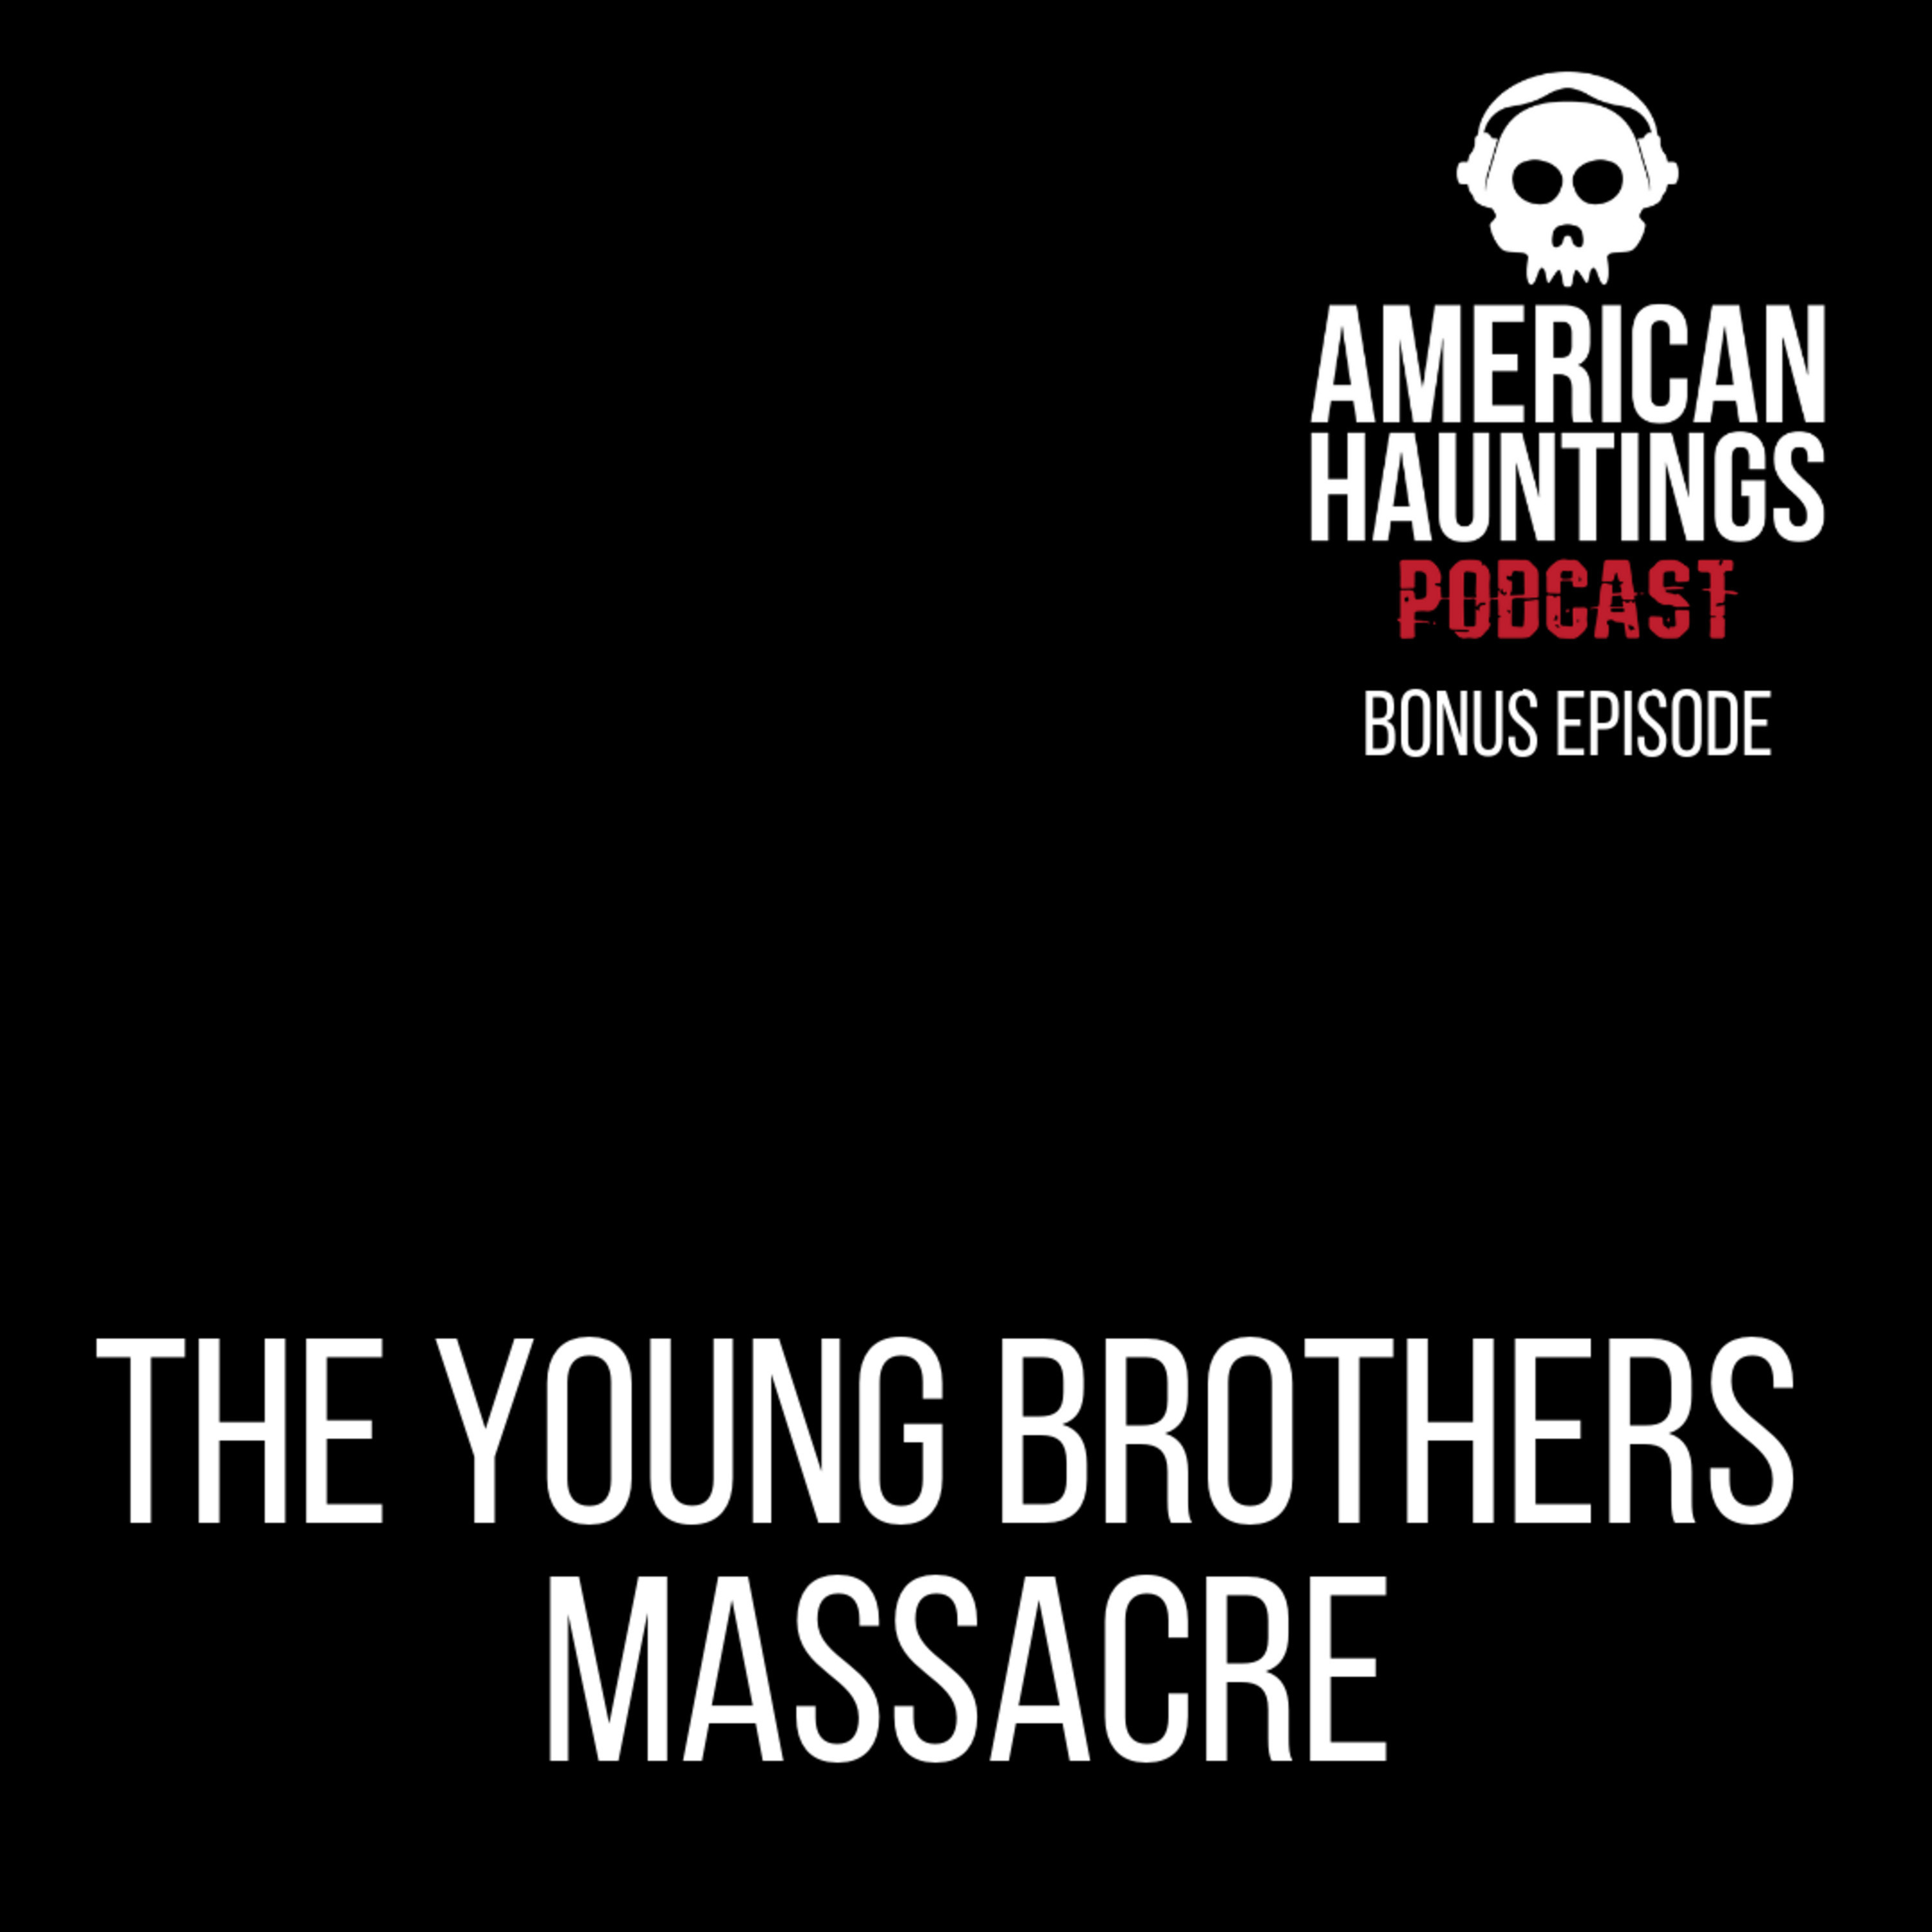 The Young Brothers Massacre